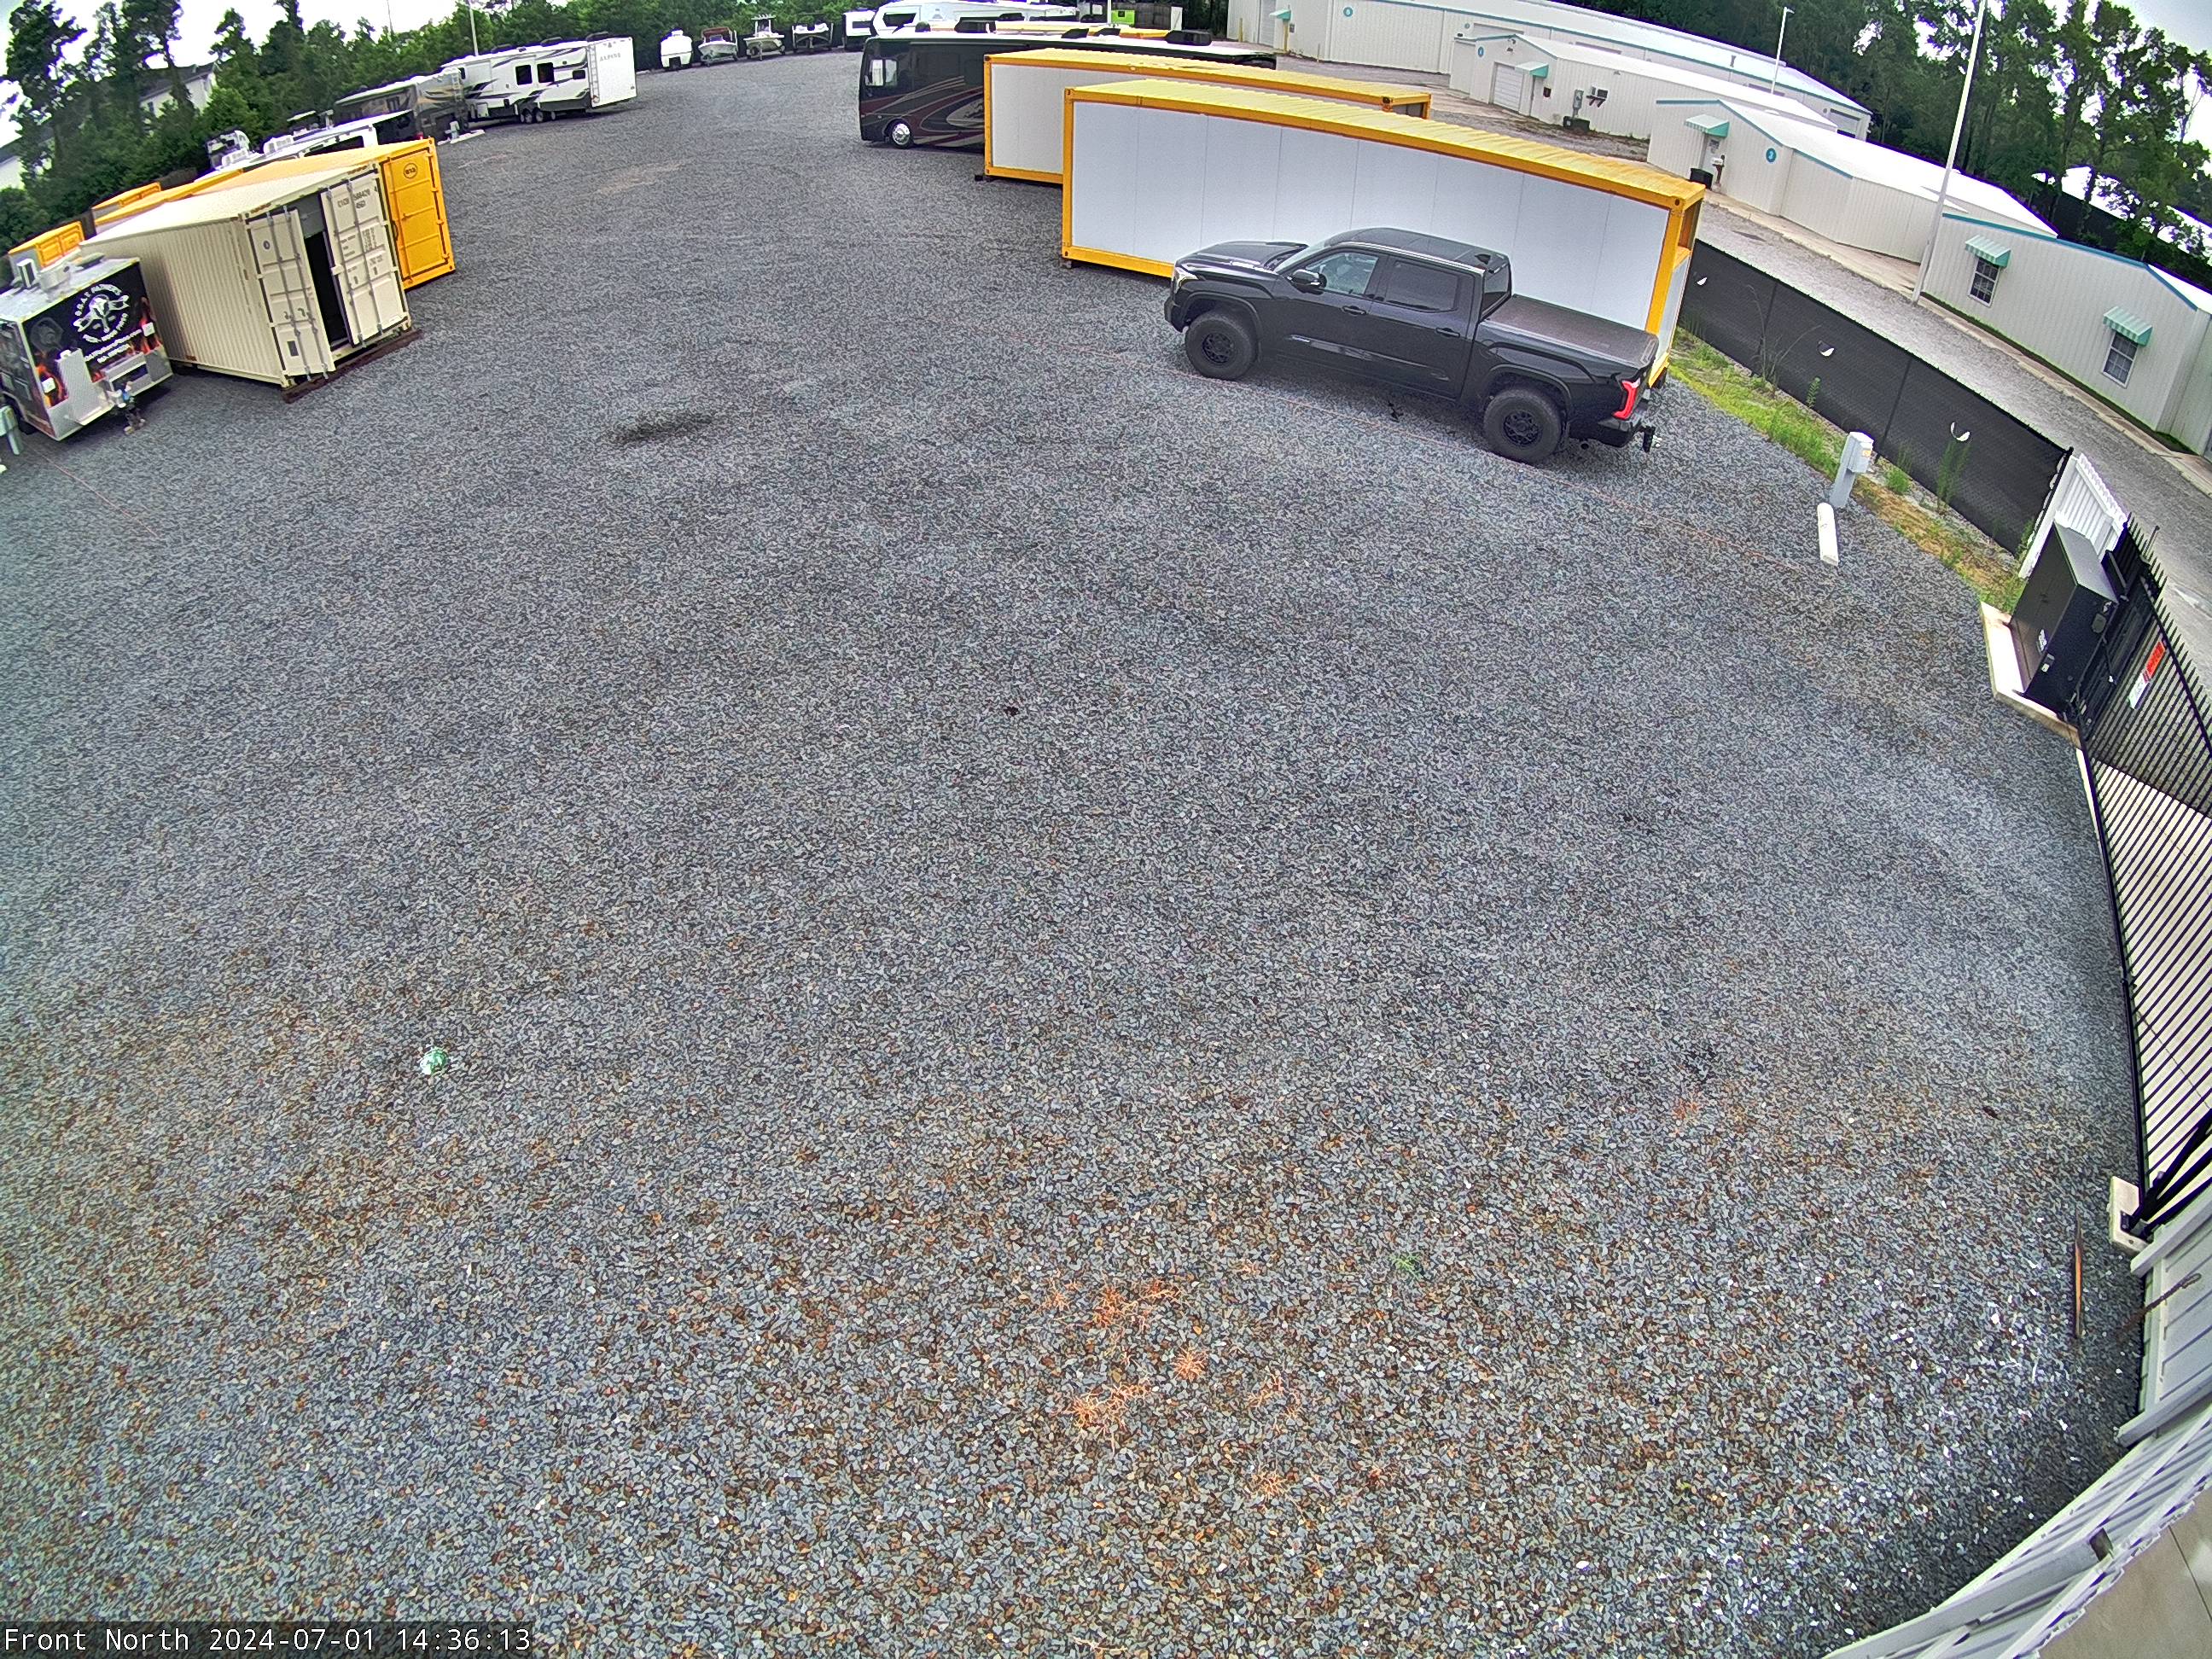 Camera Views of storage facility x 24/7 monitoring through our app